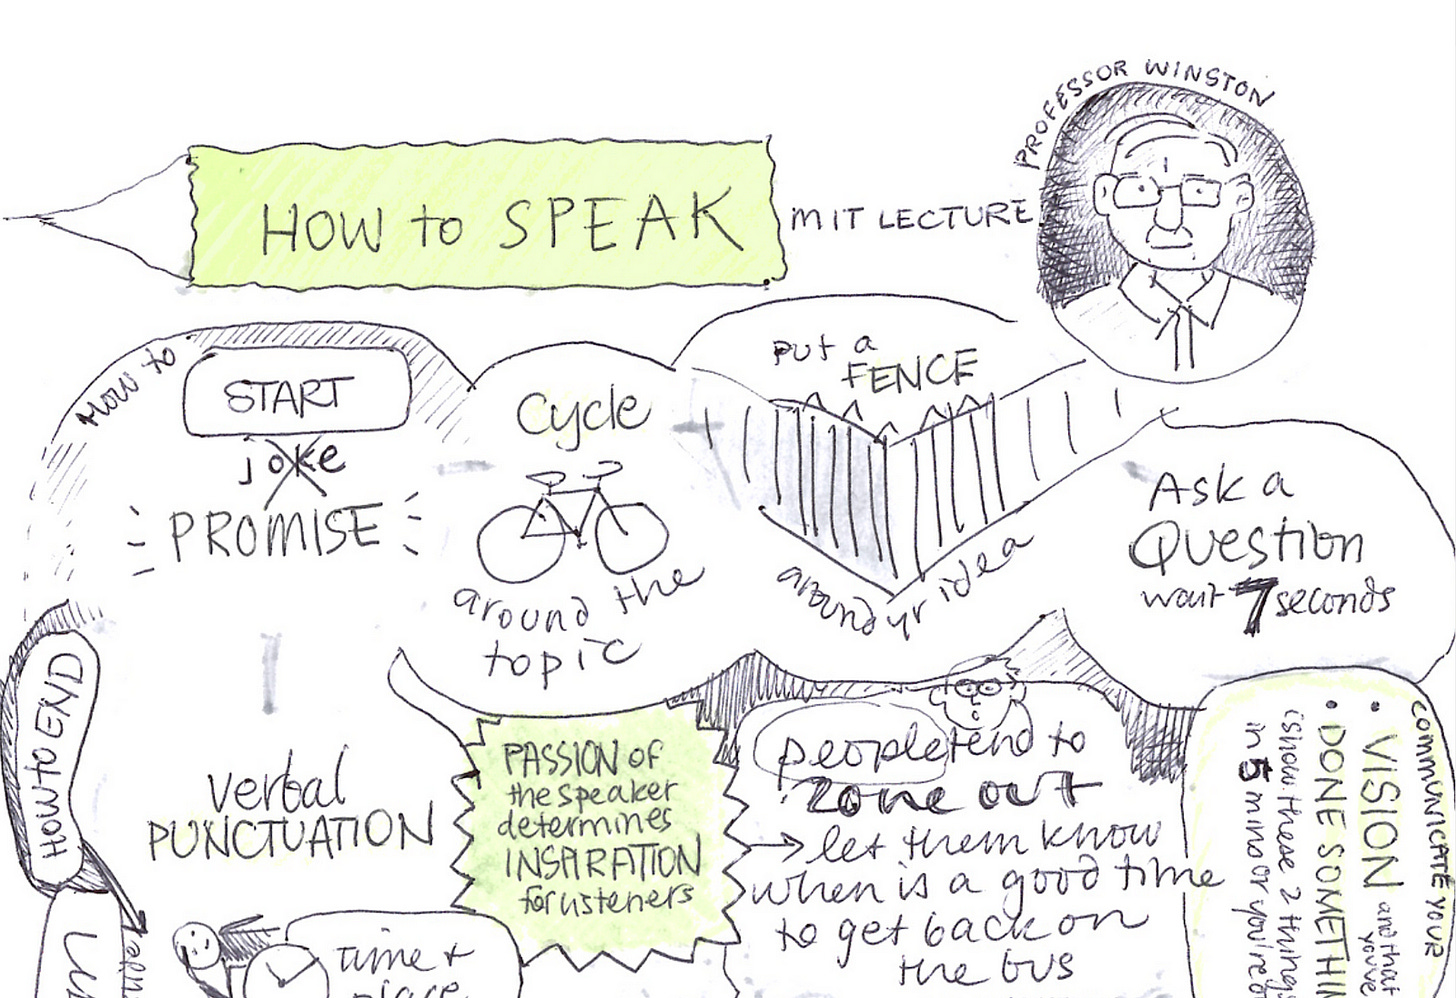 Closeup of the sketchnote that appears further down in the text of this article. The heading reads How to Speak, MIT Lecture. There is a small black ink cartoon sketch of professor Winston on the upper right. Handwritten text reads in part: Start with a promise, cycle around the topic, put a fence around your idea, ask a question and wait 7 seconds for answers; verbal punctuation.